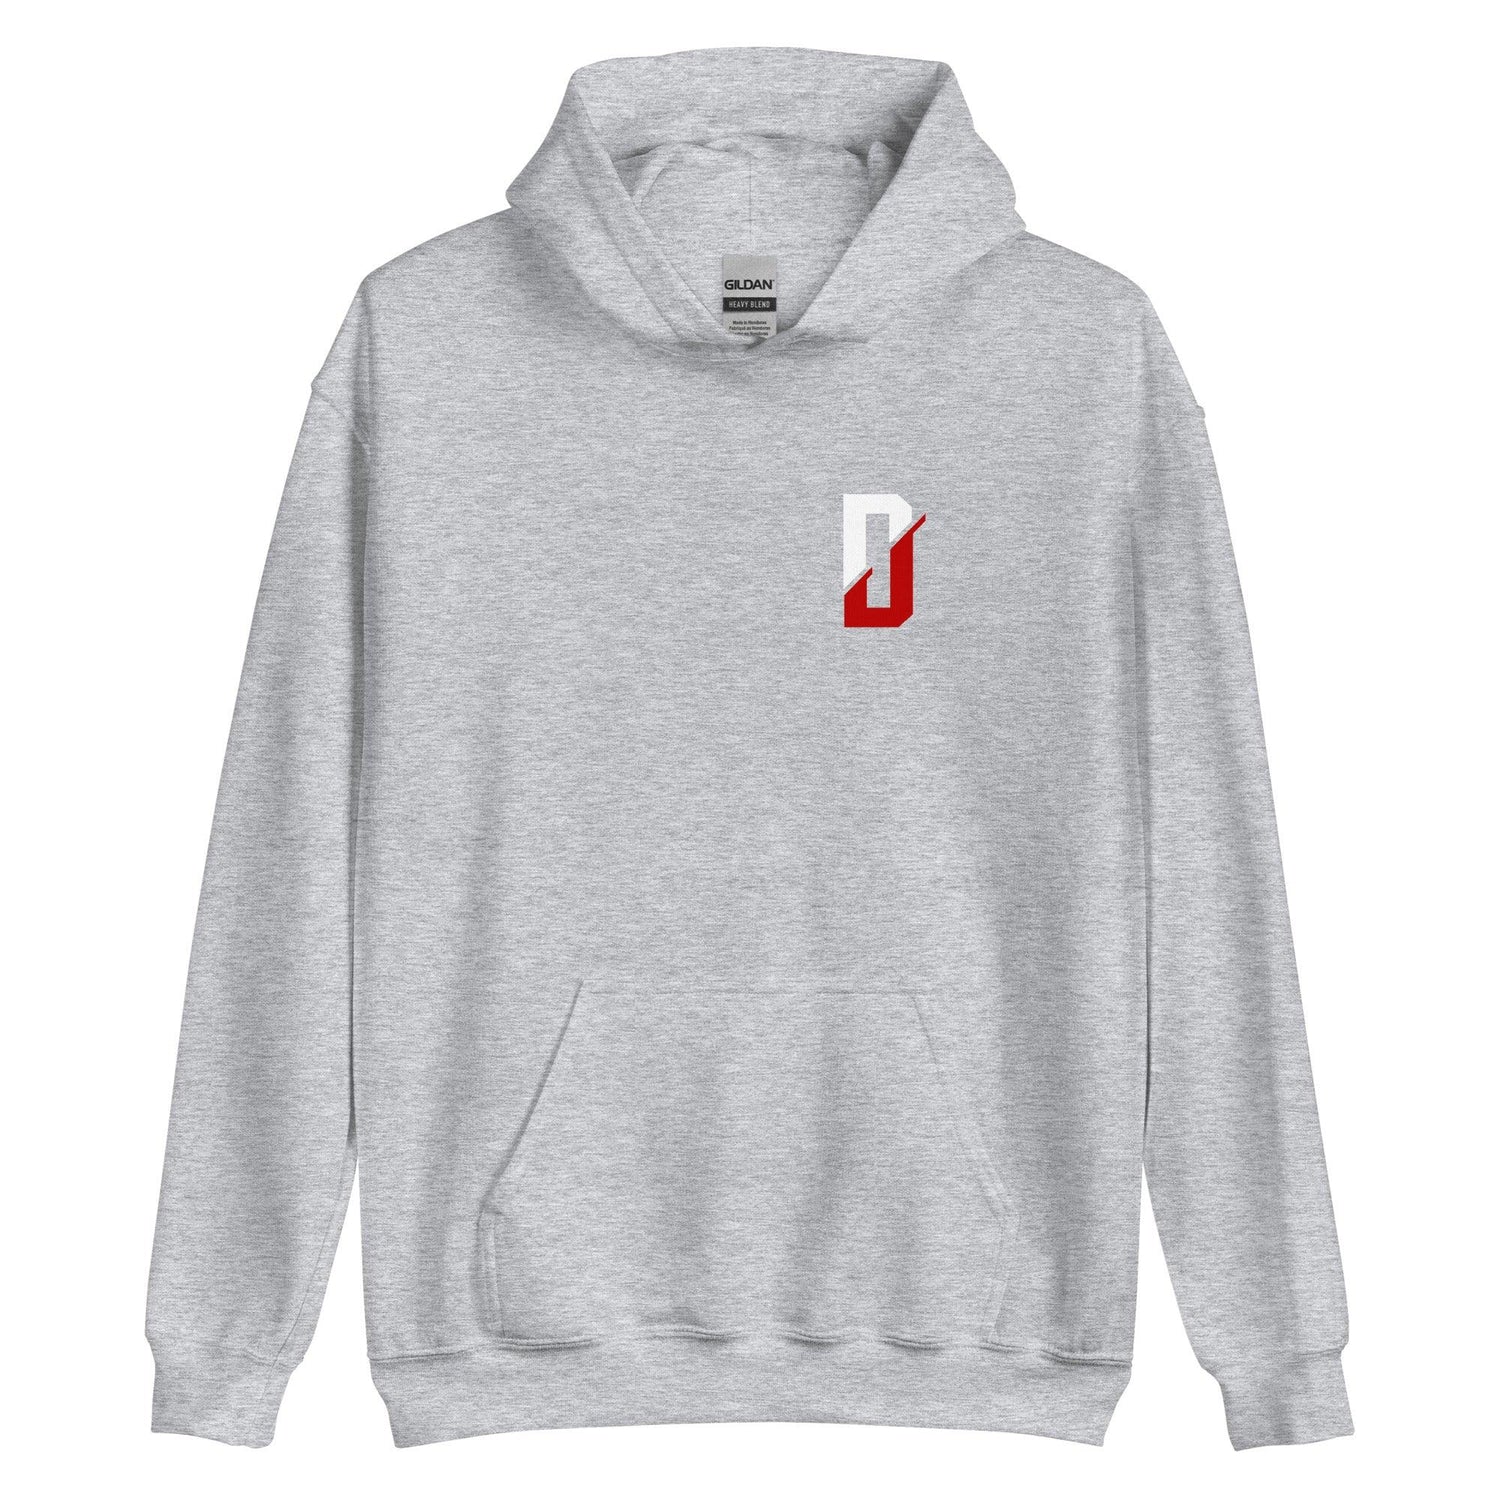 Jay Driver “Signature” Hoodie - Fan Arch